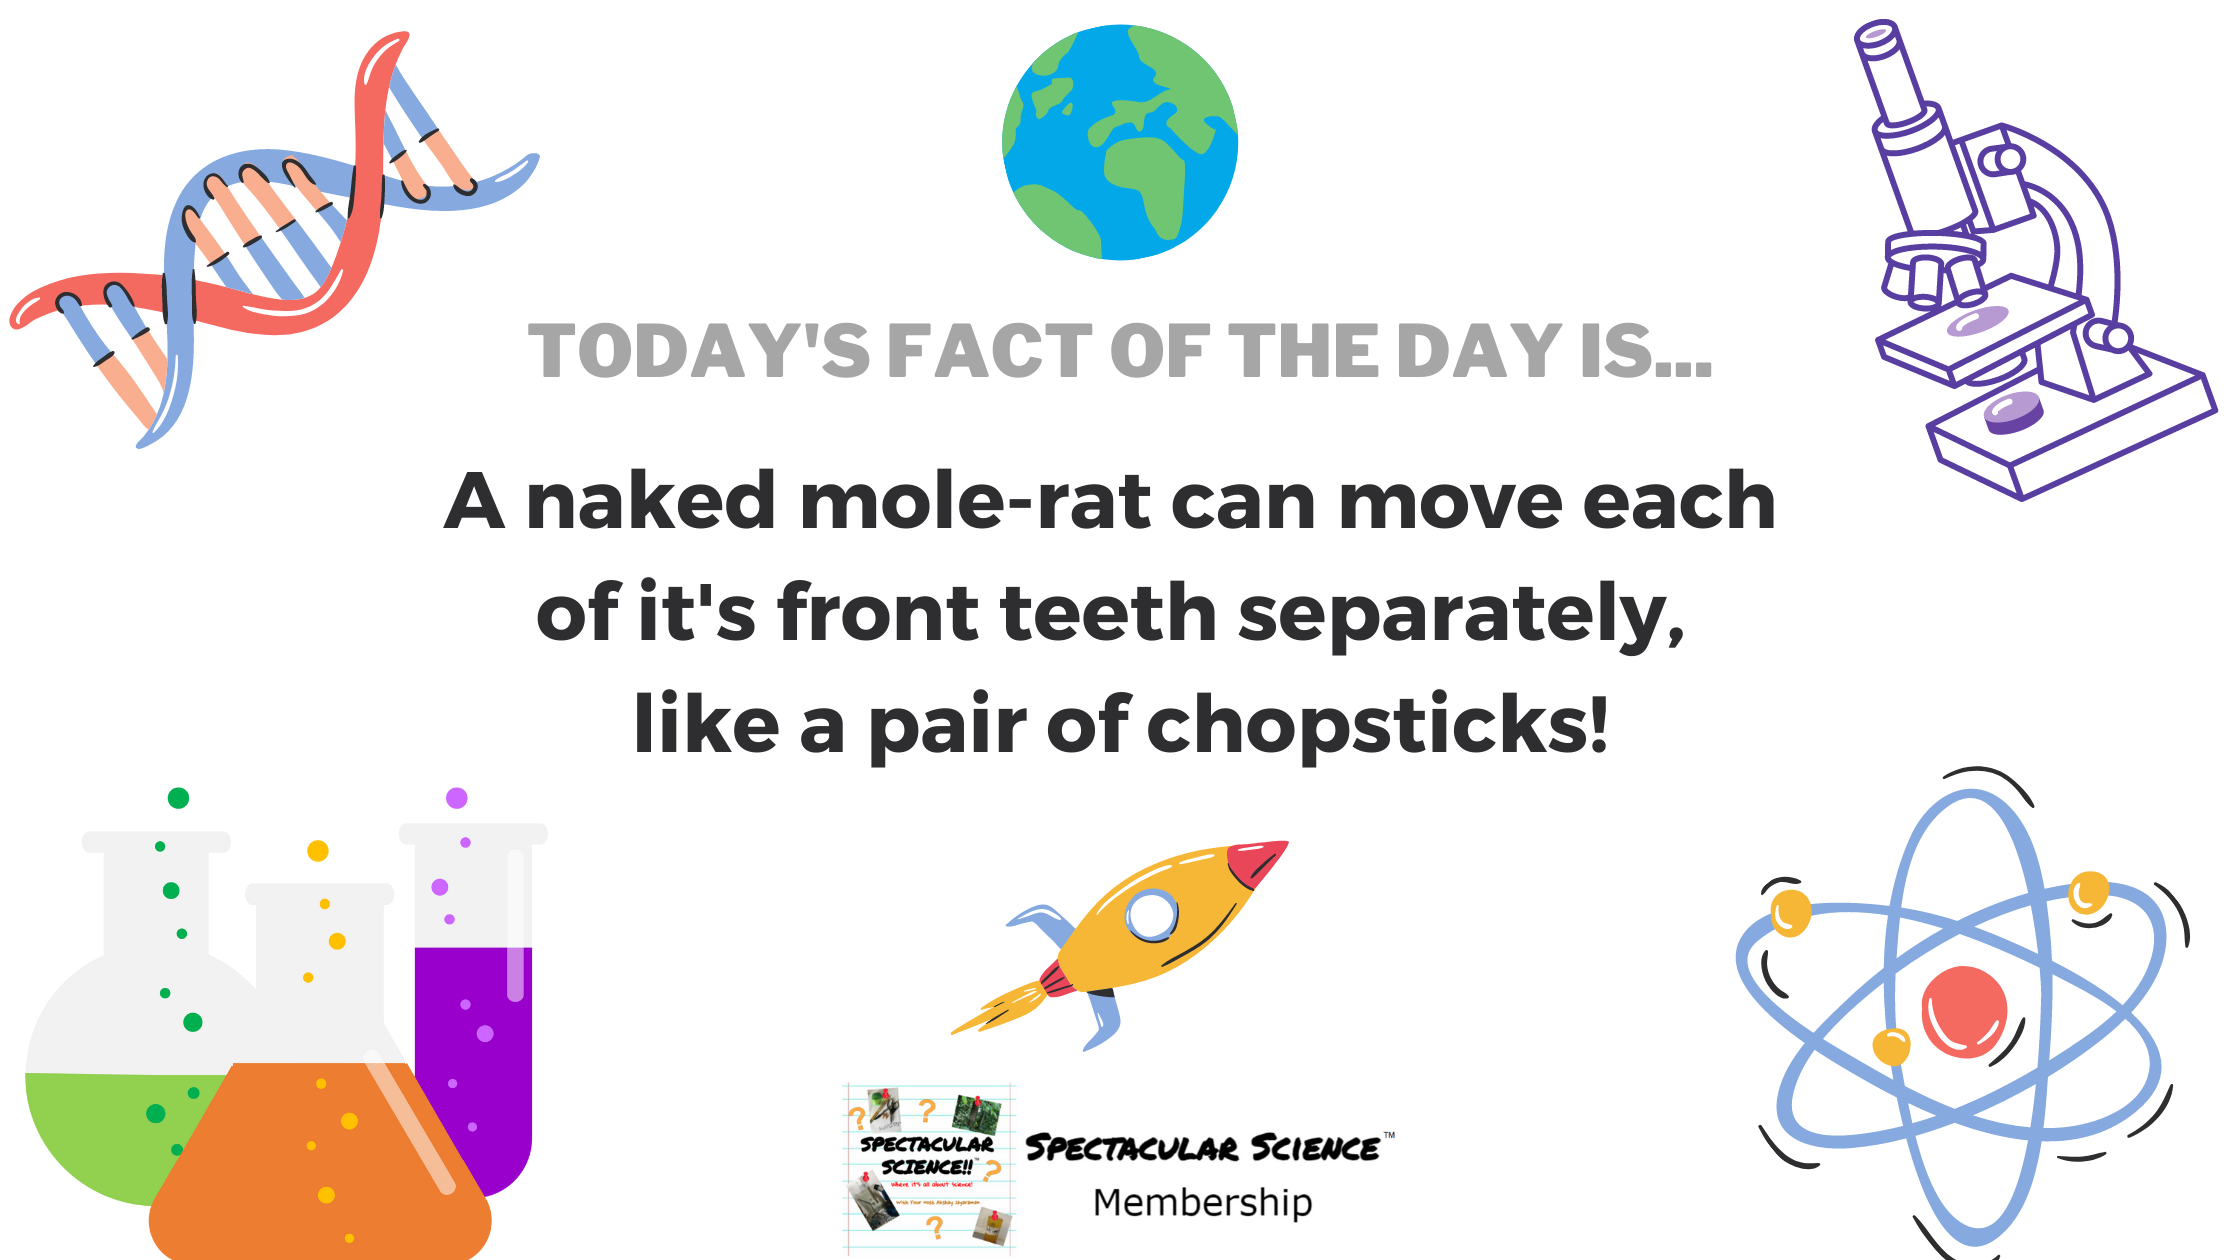 Fact of the Day Image Mar. 25th